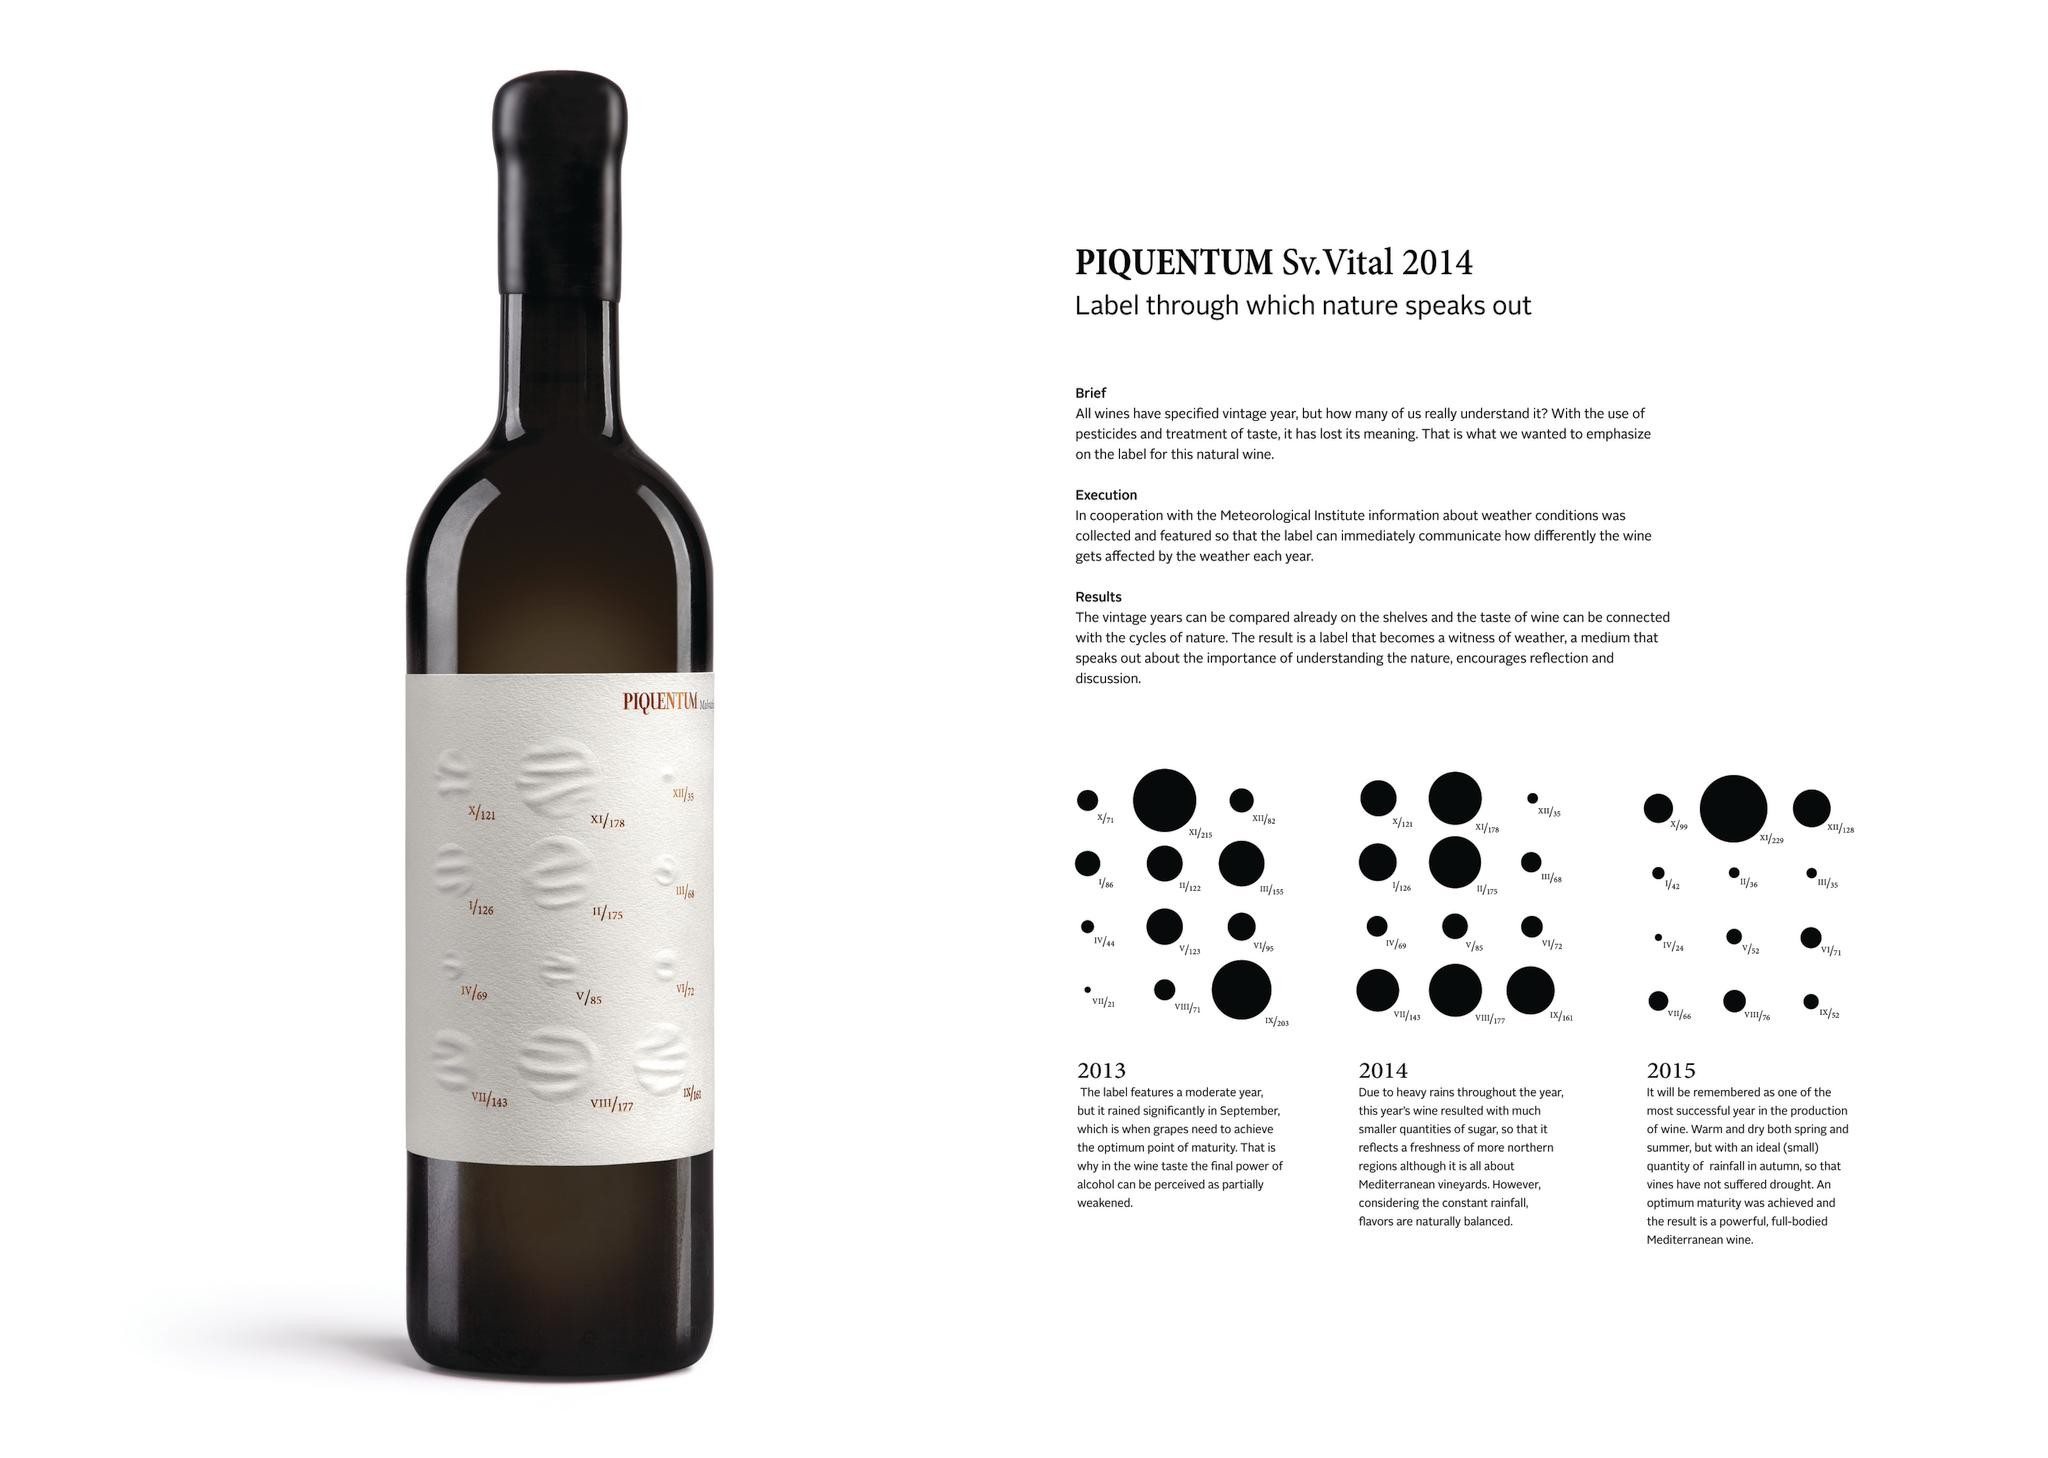 PIQUENTUM Sv. Vital 2014 - Label through which nature speaks out